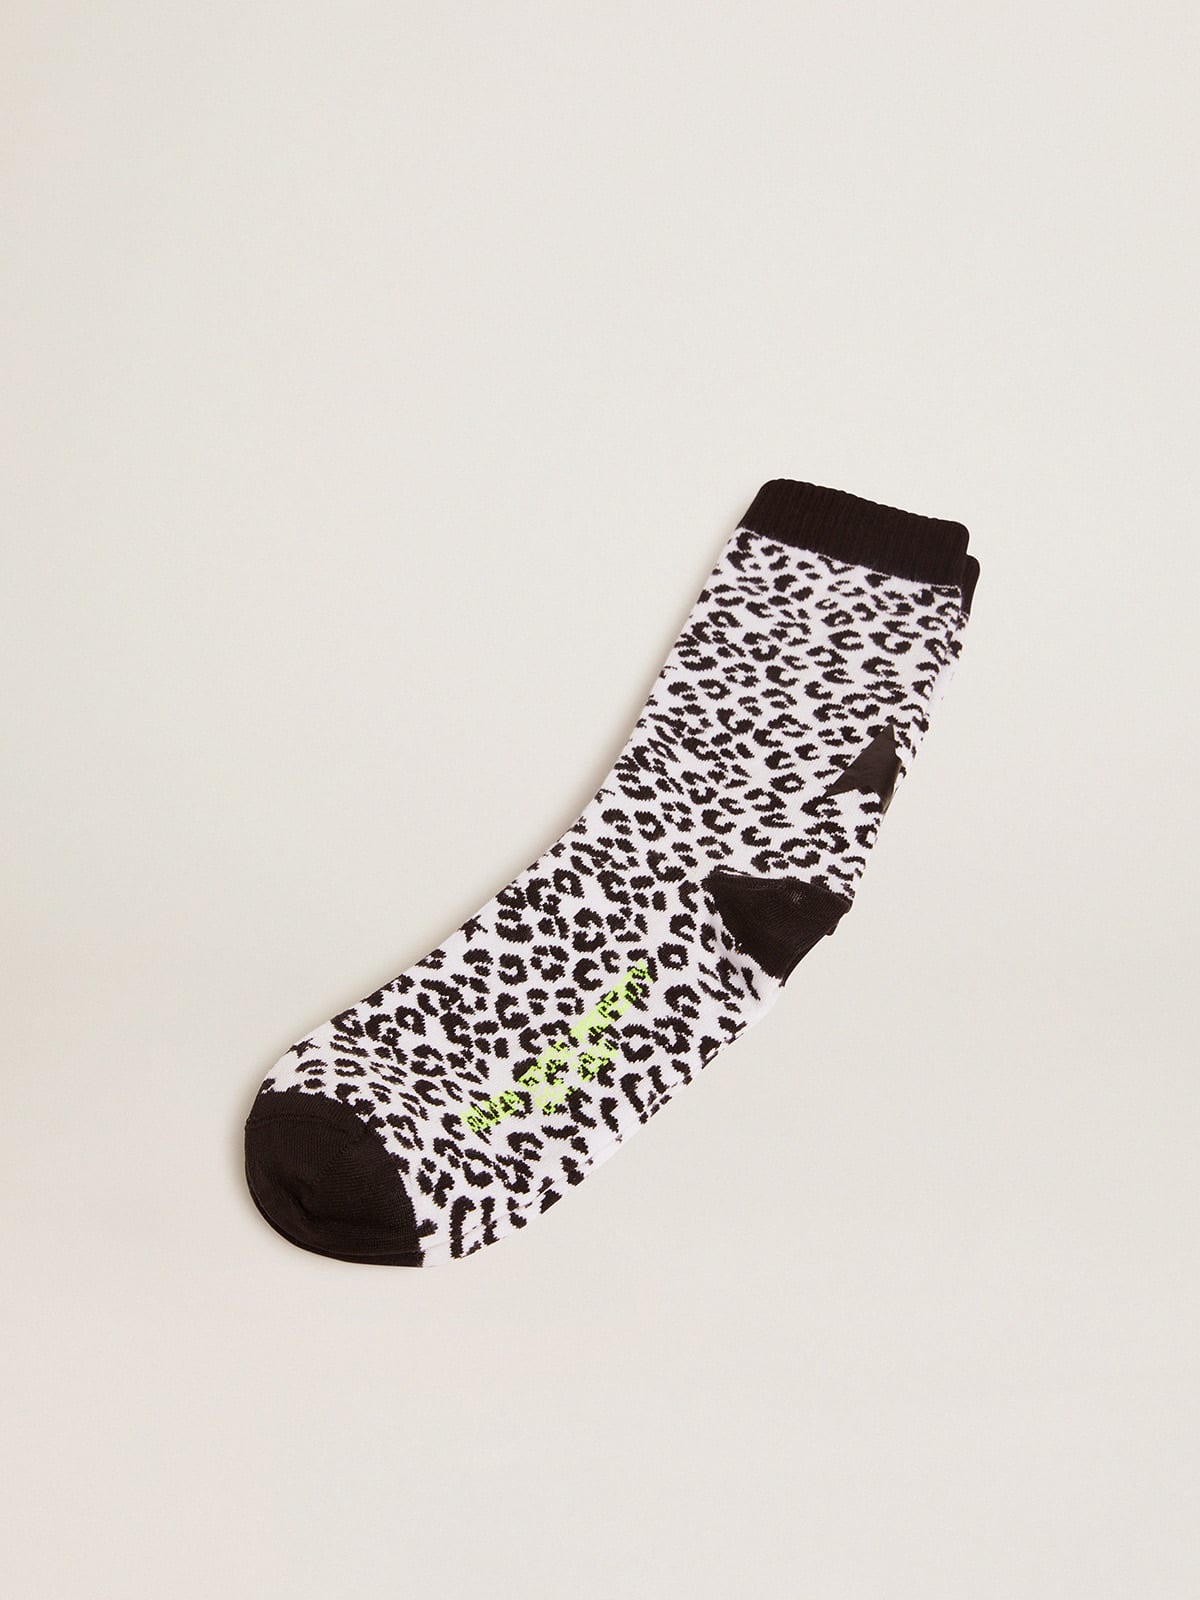 Black and white socks with leopard print and black star on the back